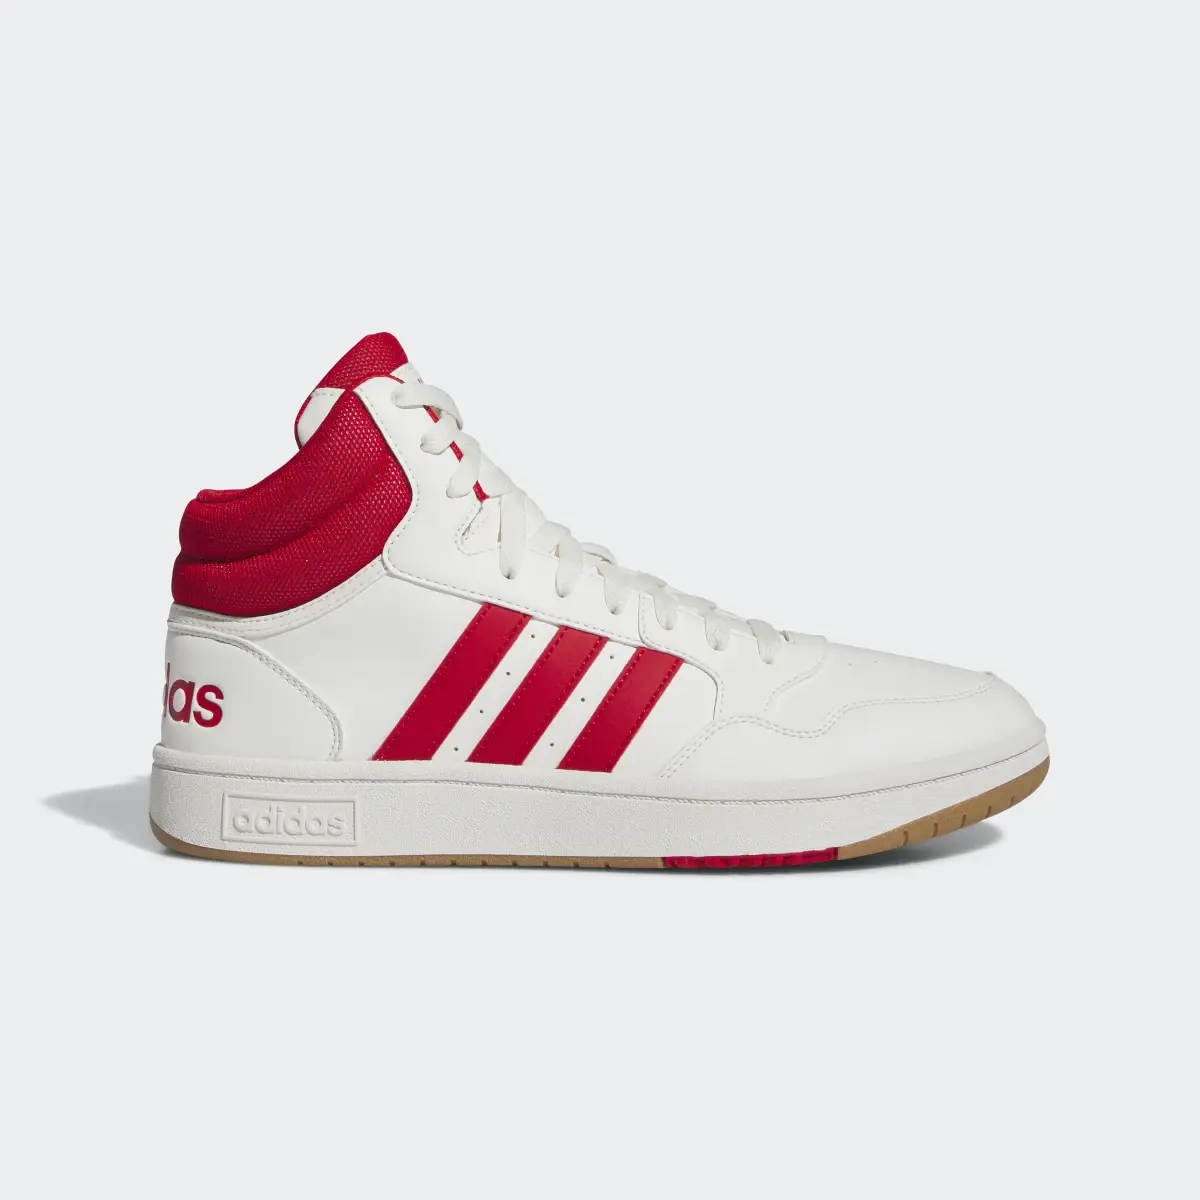 Adidas Hoops 3.0 Mid Lifestyle Basketball Classic Vintage Shoes. 2